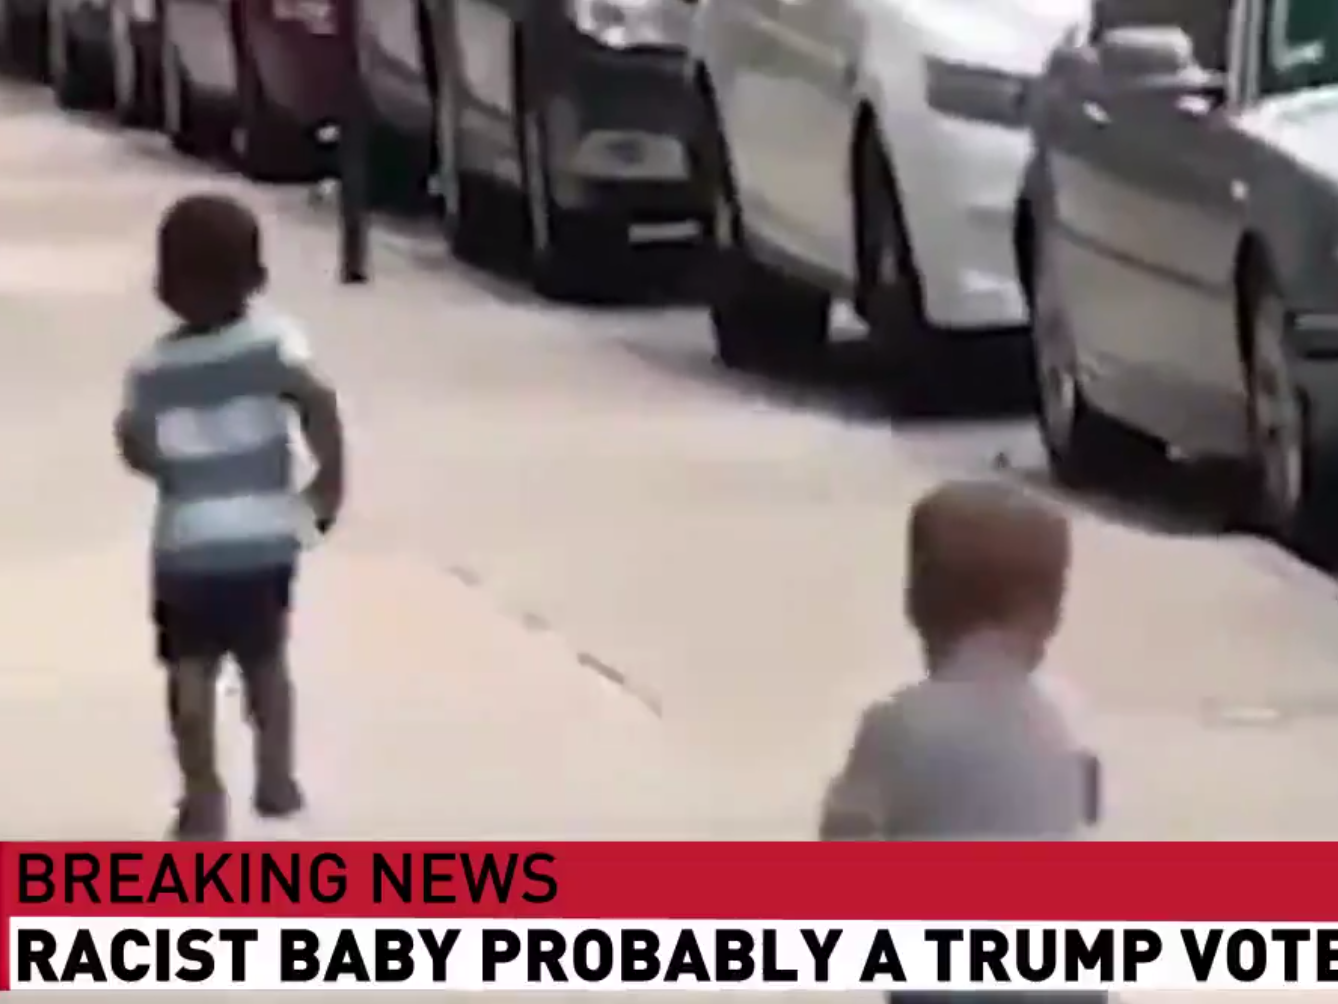 The US president uploaded a doctored CNN video about a ‘racist baby’